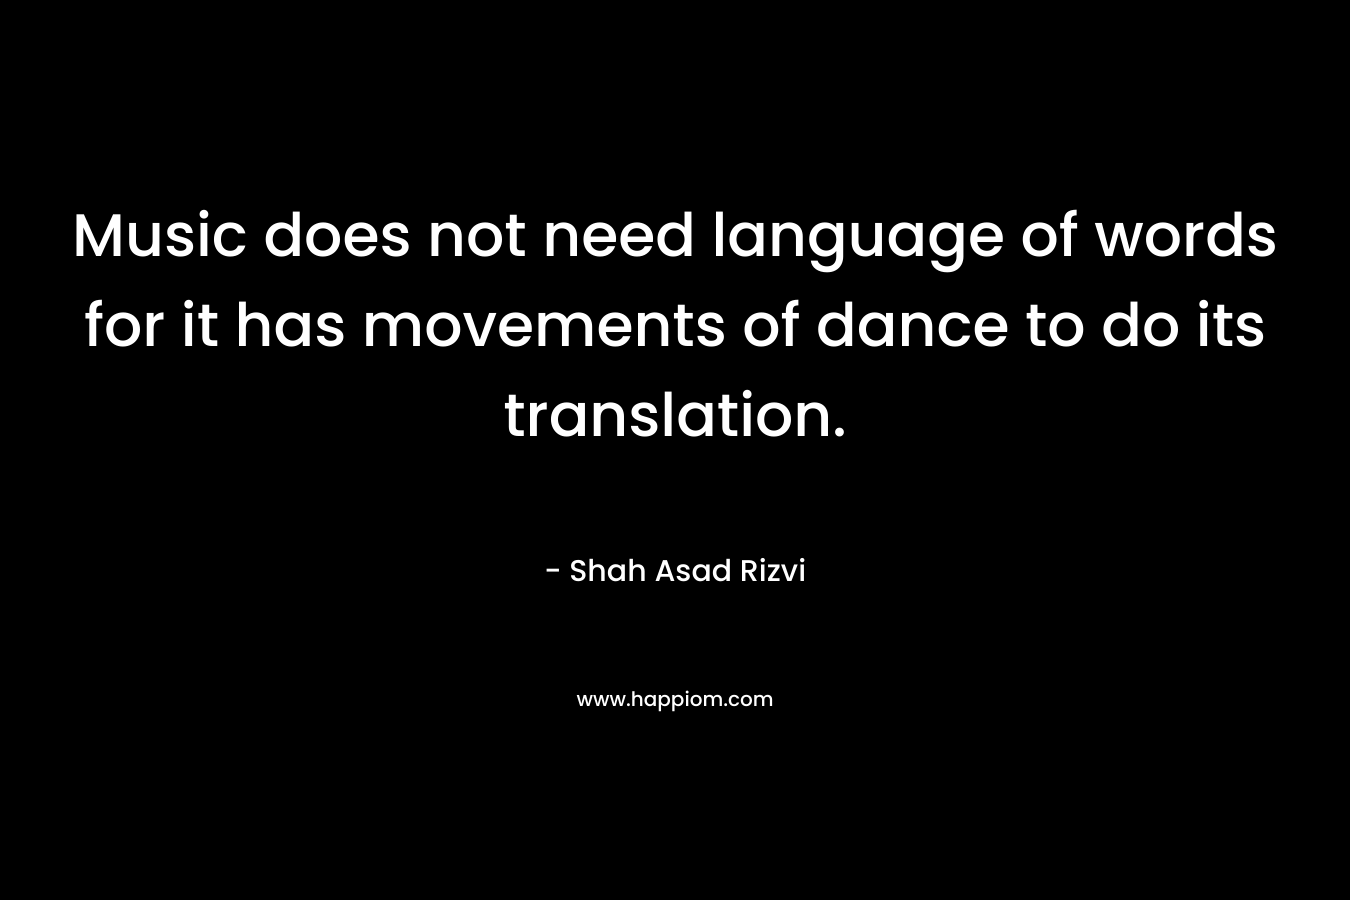 Music does not need language of words for it has movements of dance to do its translation.